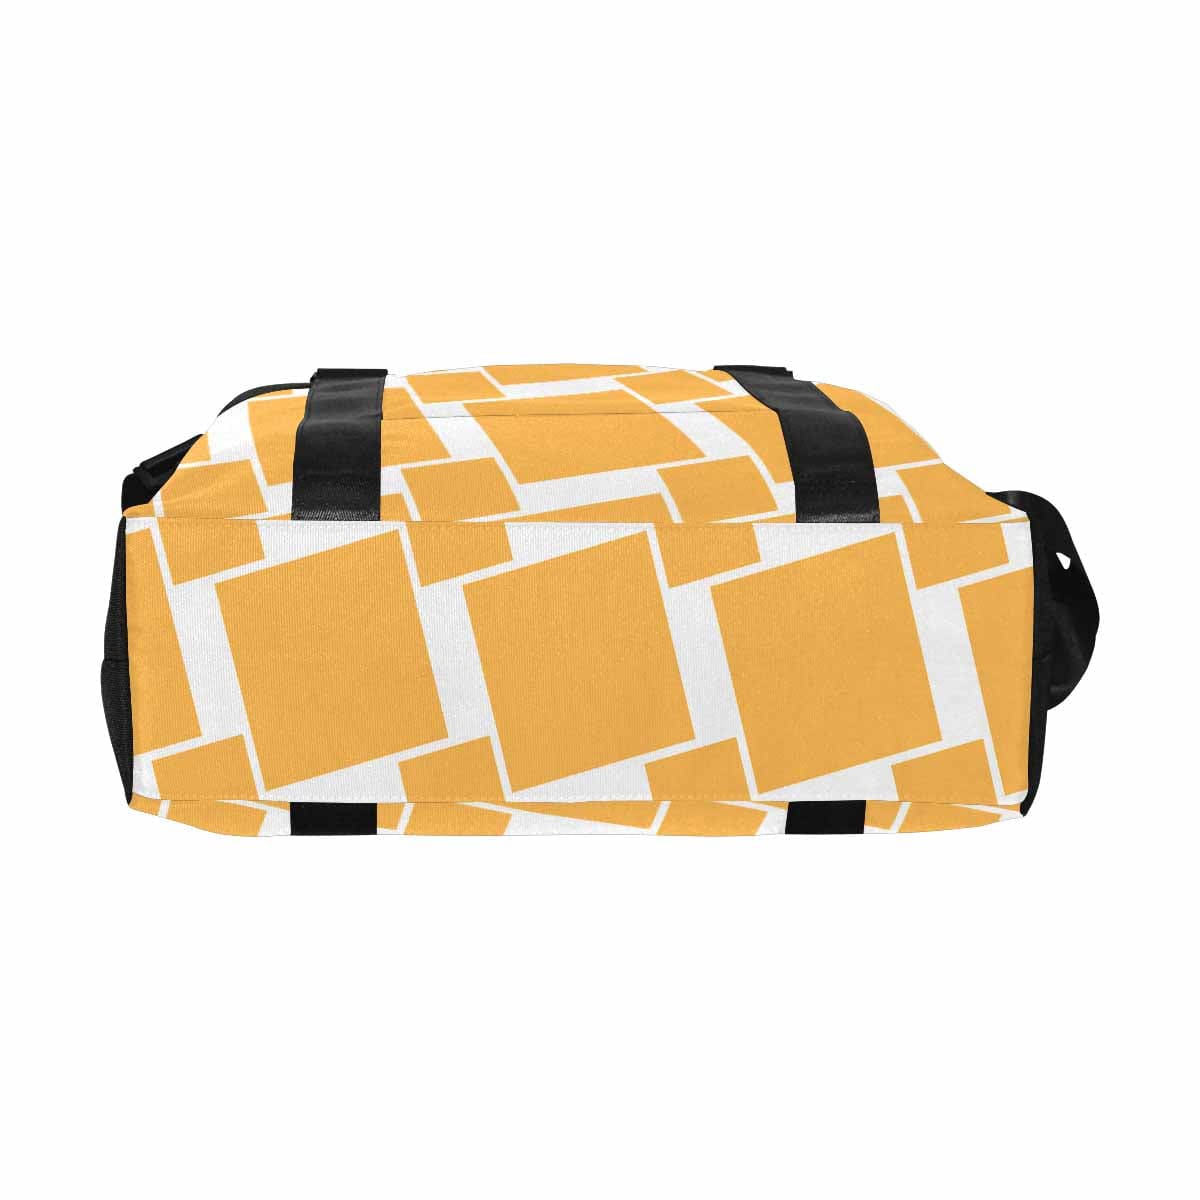 Duffle Bag - Large Capacity - Peach - Bags | Travel Bags | Canvas Carry